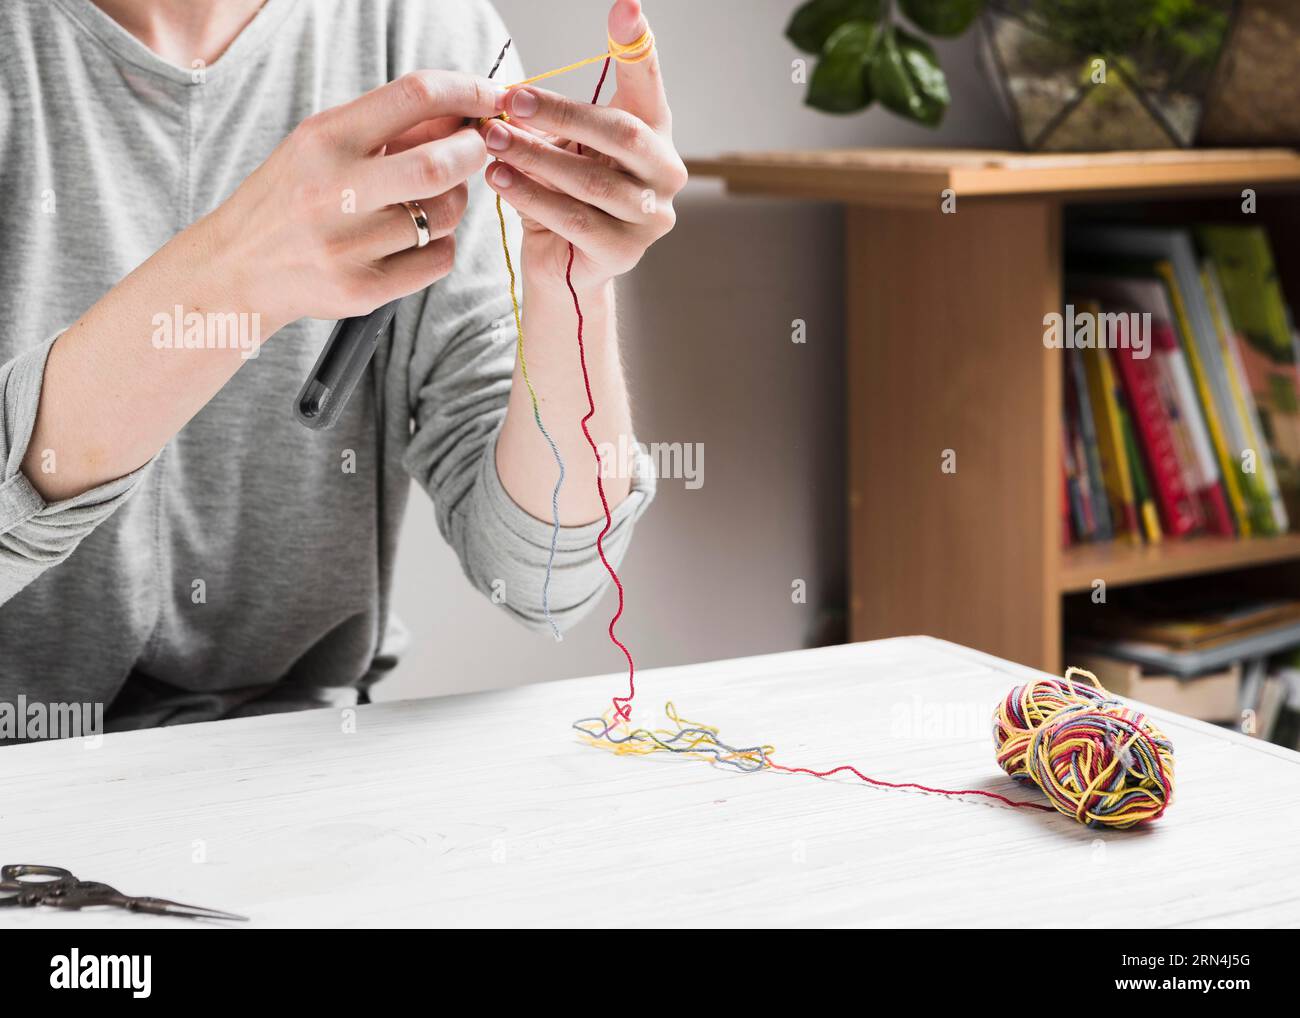 Female hands knitting with colorful thread Stock Photo